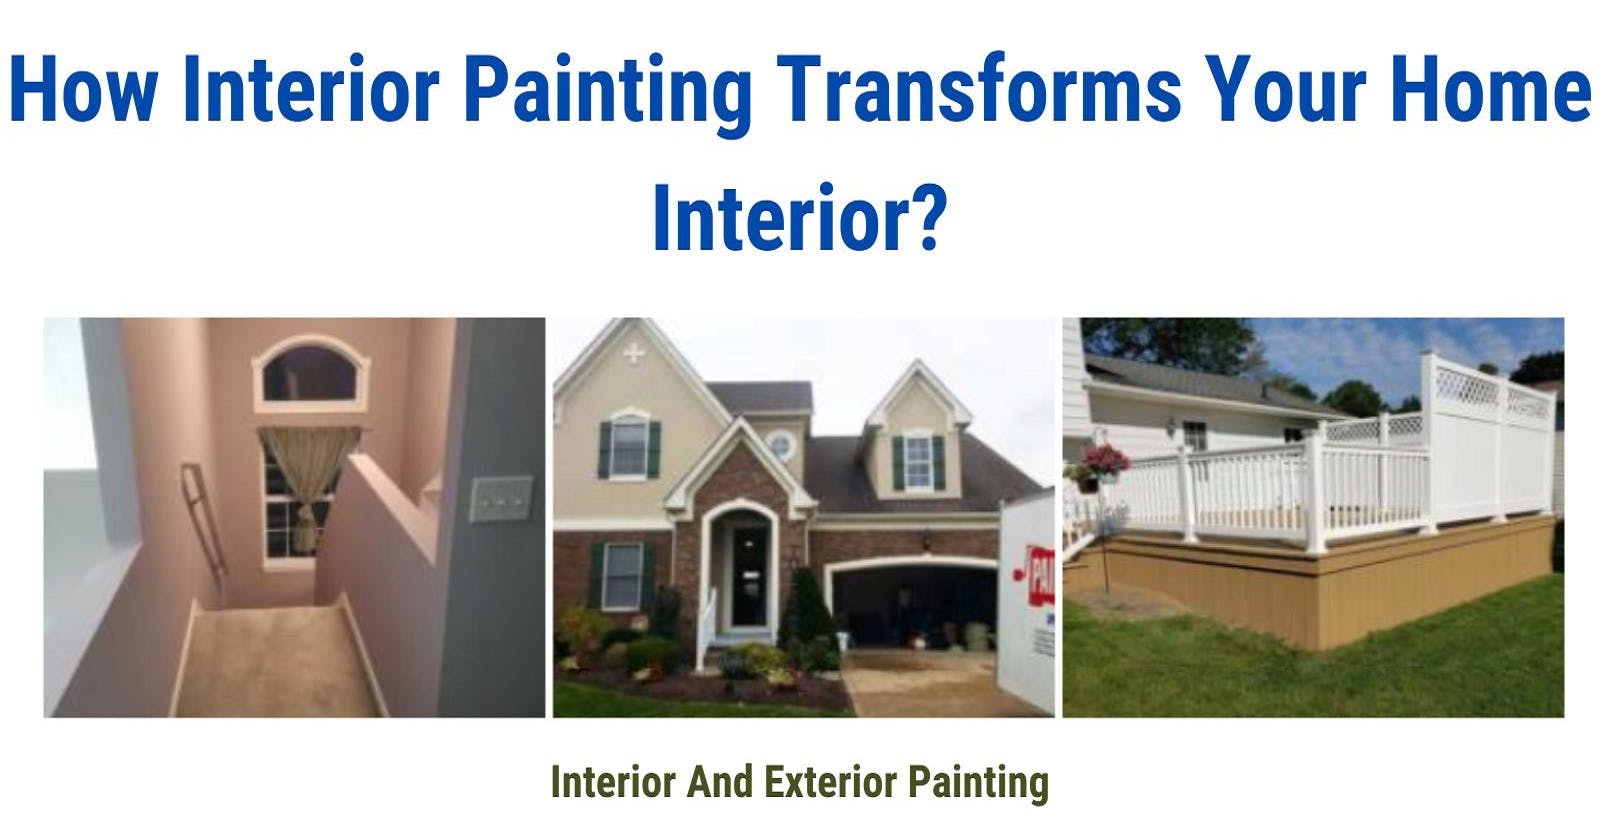 How Interior Painting Transforms Your Home Interior?